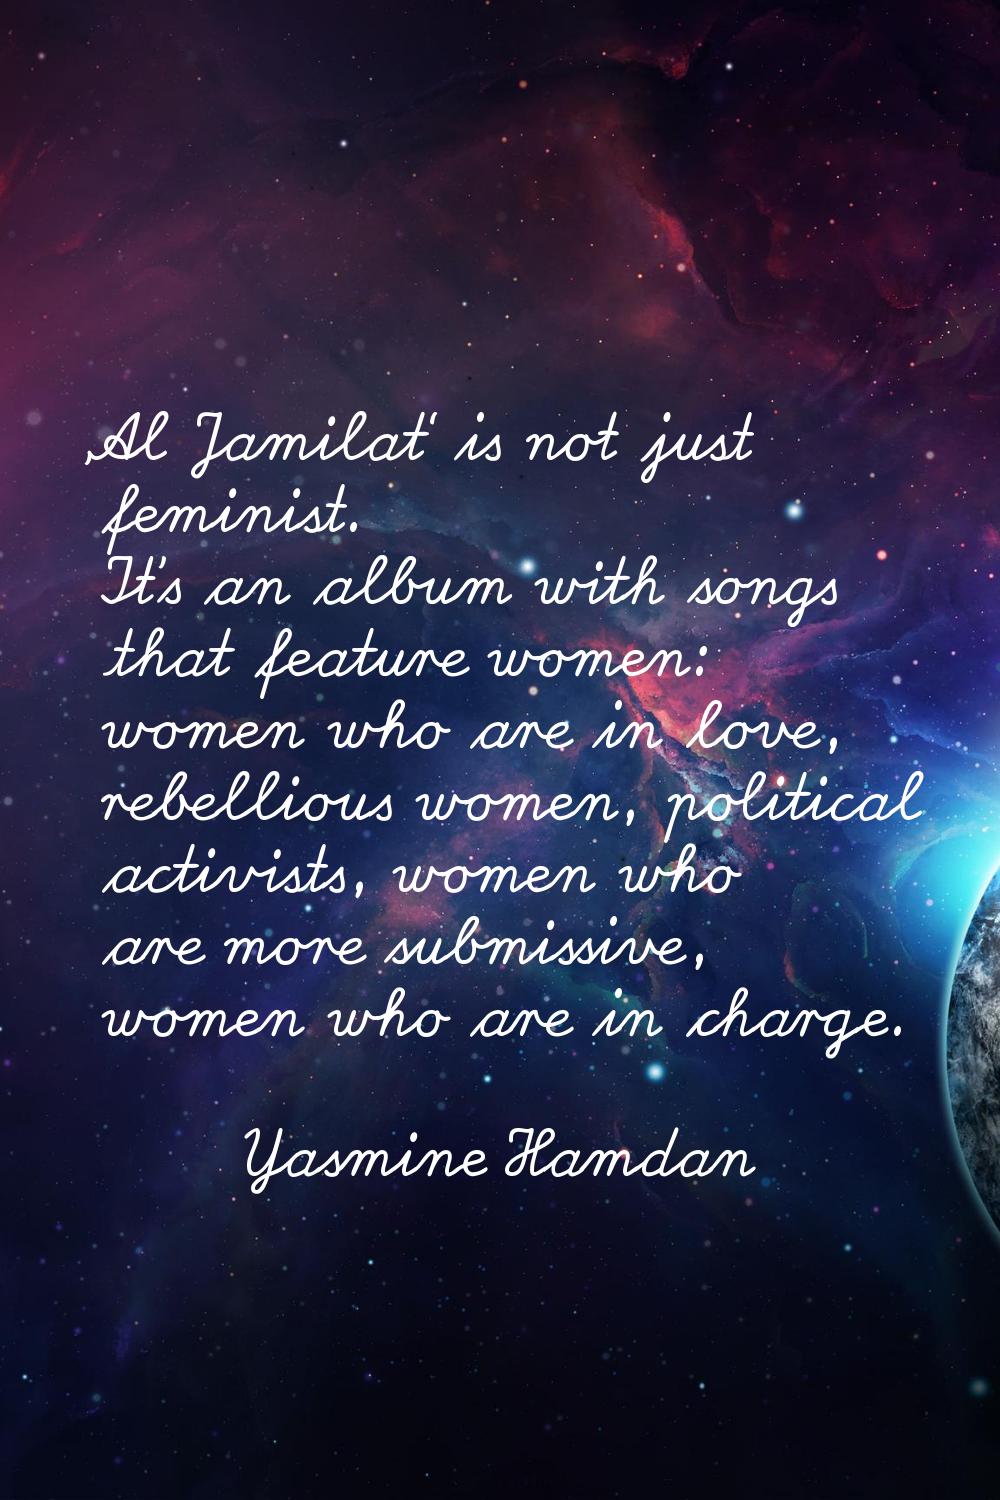 'Al Jamilat' is not just feminist. It's an album with songs that feature women: women who are in lo